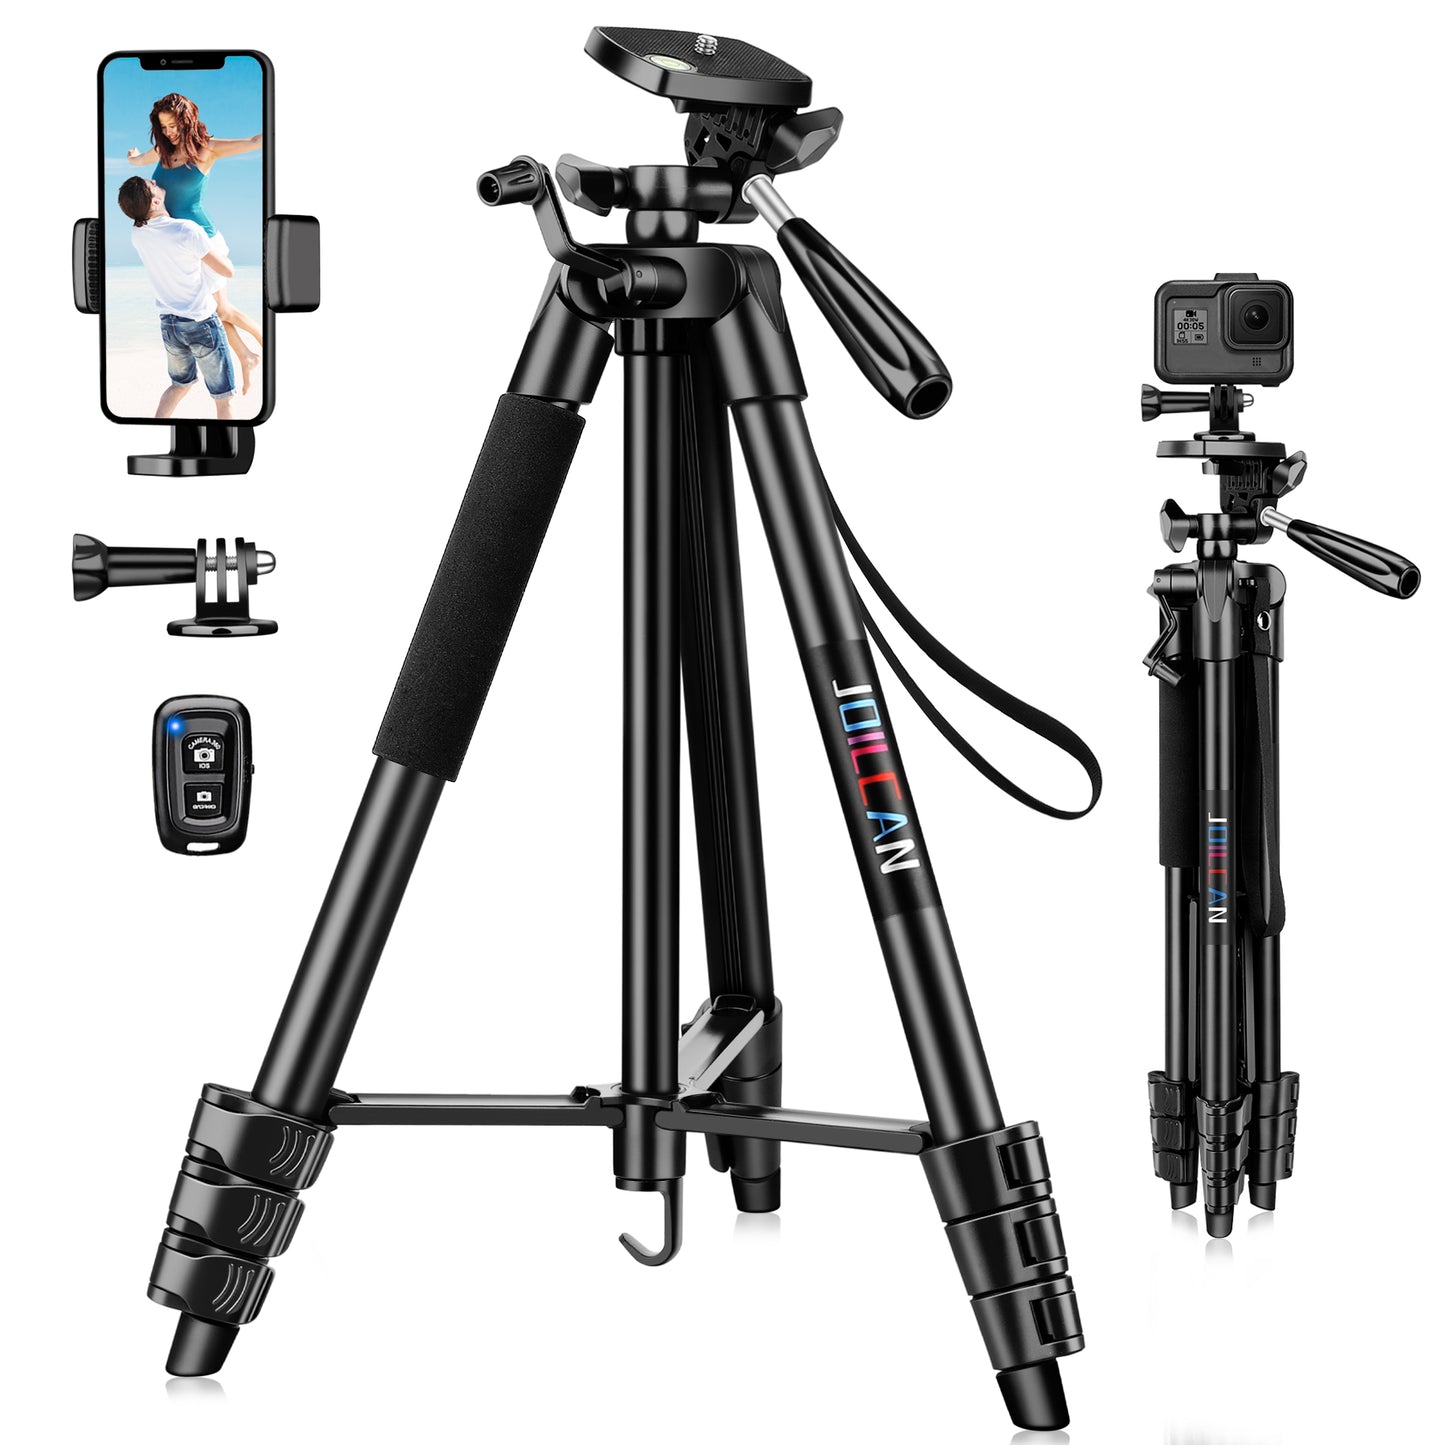 JOILCAN Phone Tripod Stand, 54" Aluminum Extendable Camera Tripod with Phone Holder & Control Remote Shutter for Android/iOS, Lightweight Portable Tripod for iPhone/Smartphone/Action Camera(EU)